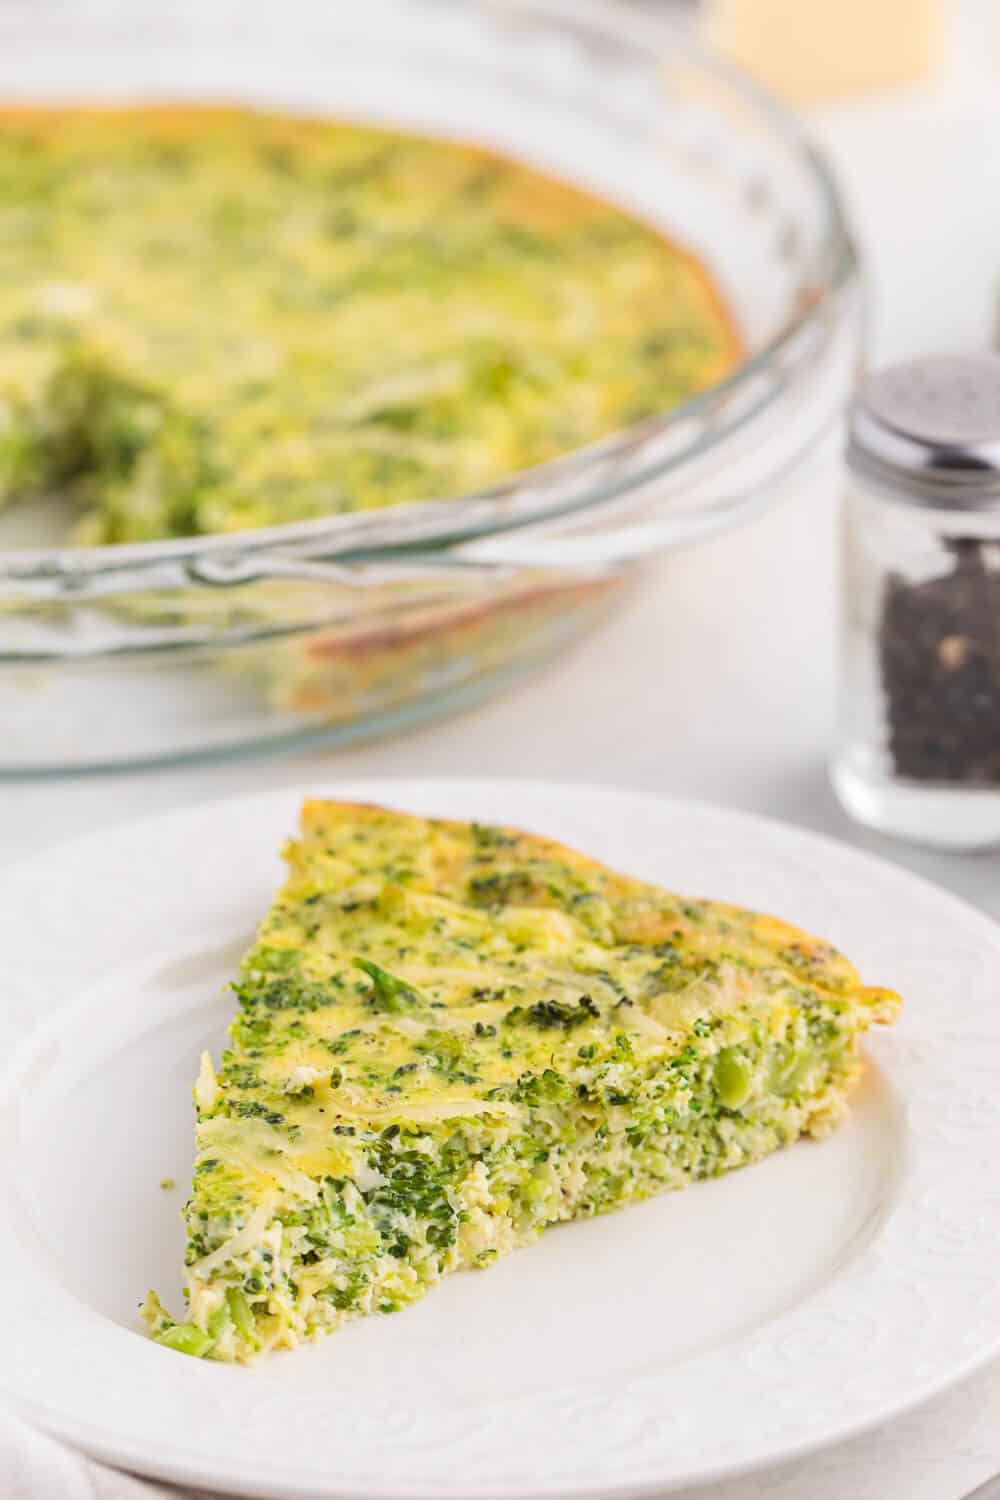 Broccoli Swamp - Don't let the name fool you - this versatile veggie-packed egg dish is delicious! Using fresh or frozen broccoli, along with eggs, Swiss cheese and a subtle garlic flavour, the whole family will love this dish!